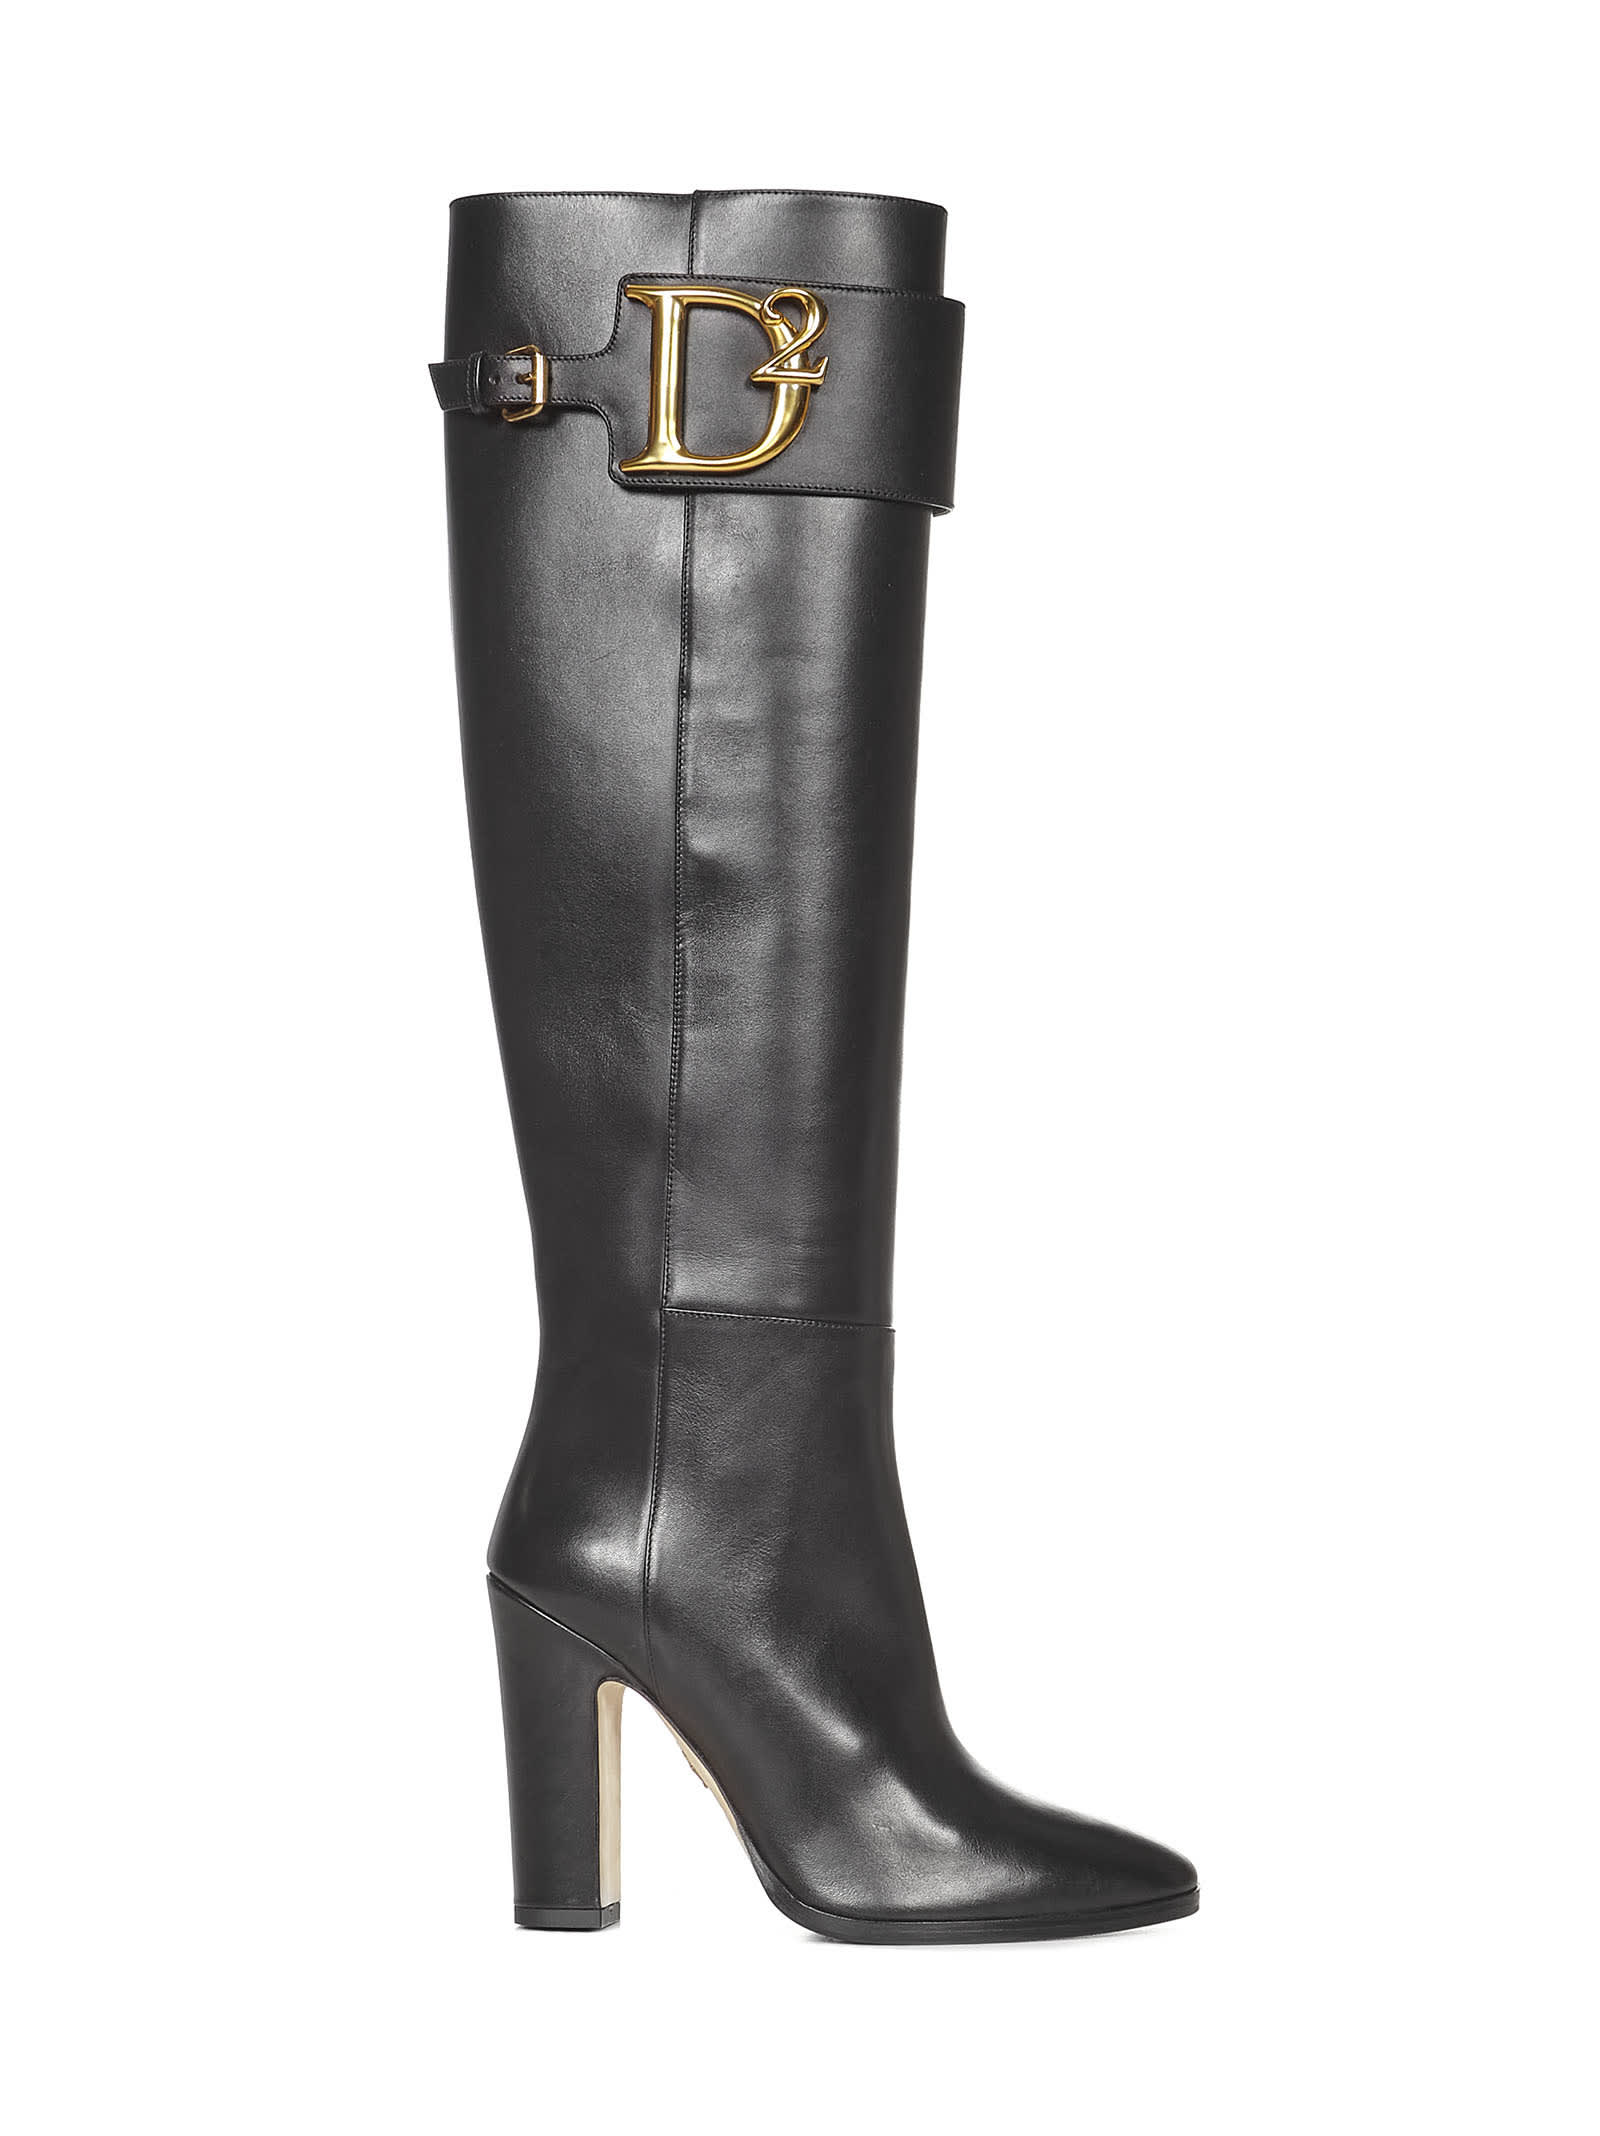 Dsquared2 Statement Boots